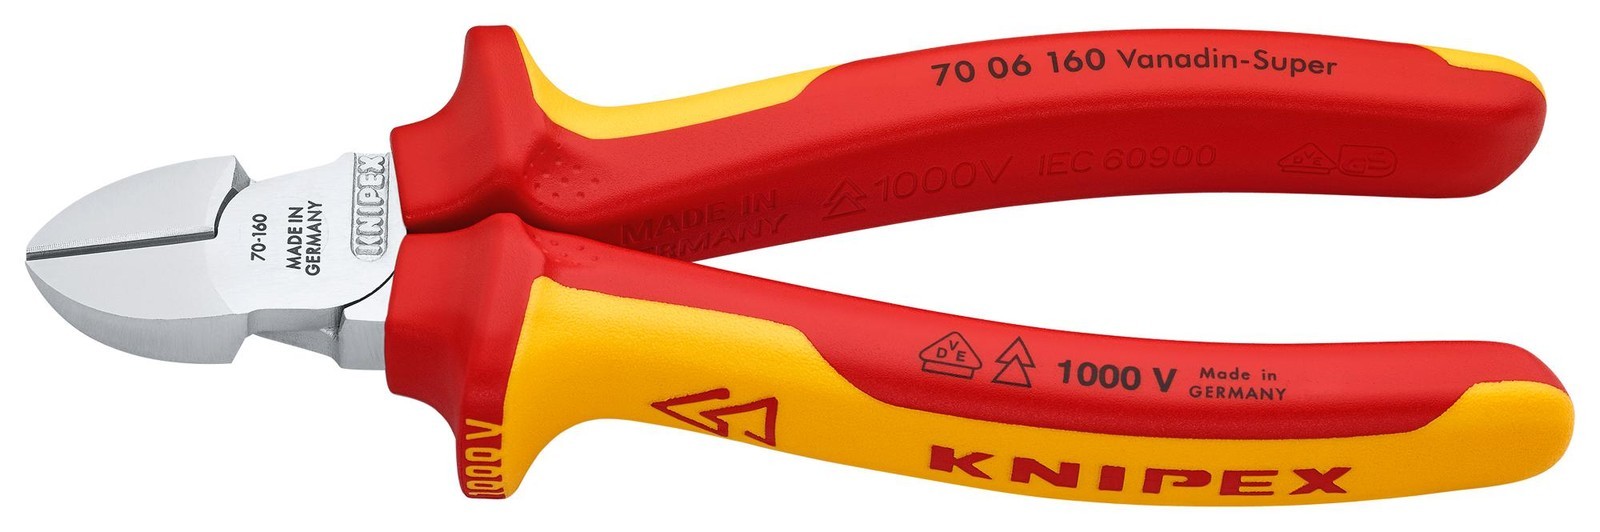 Knipex 70 06 160 Cutter, Side